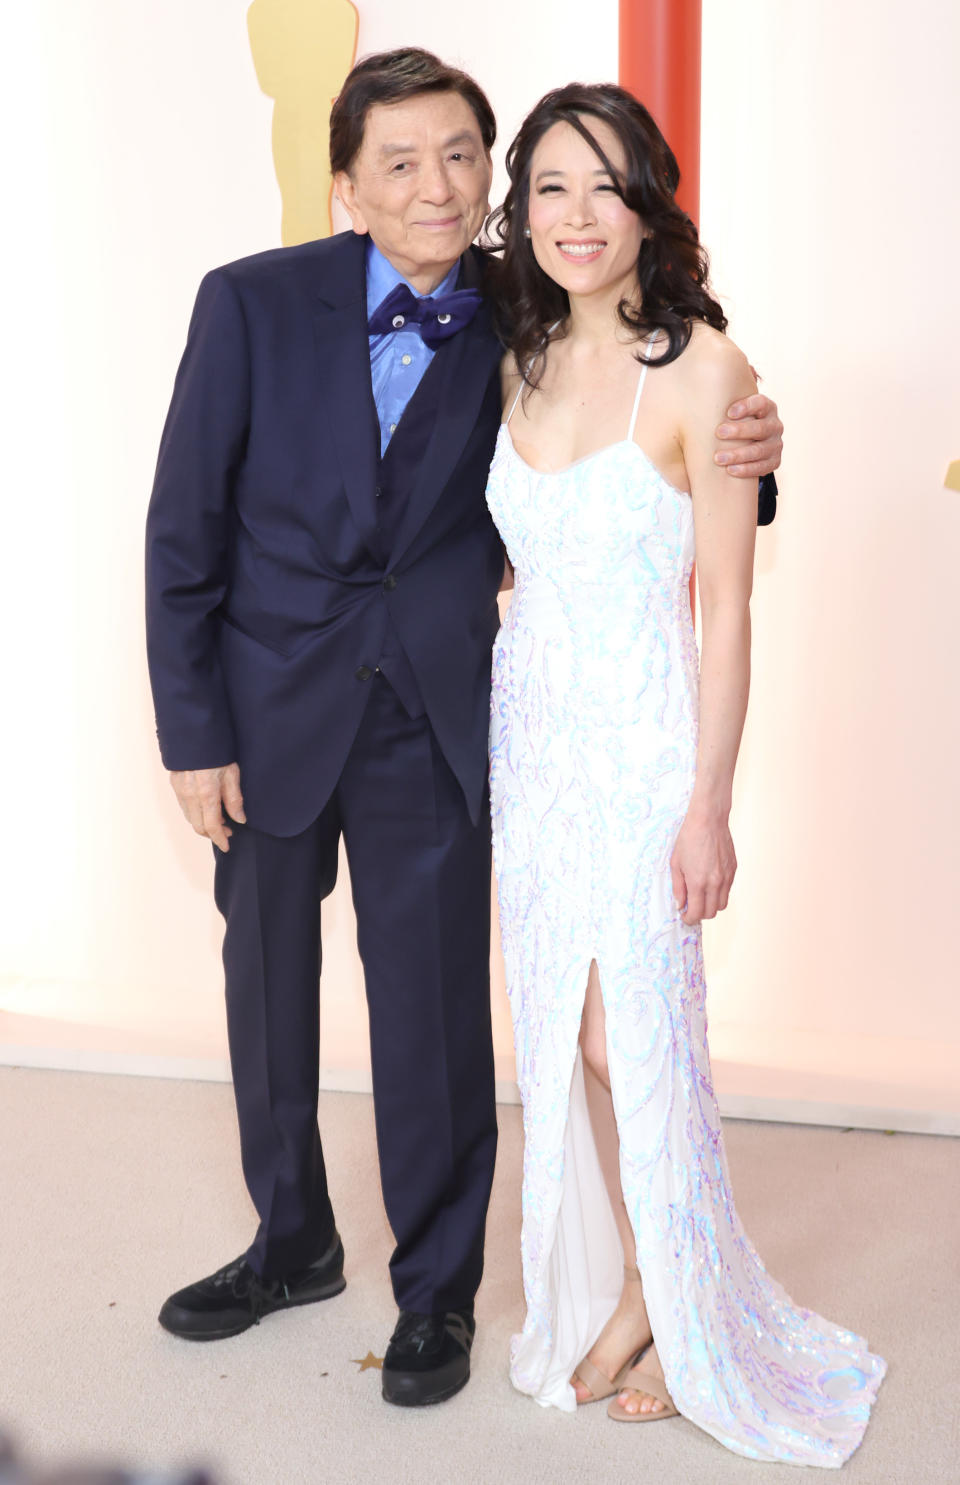 James Hong brought his daughter, April Hong, along to attend the 95th Academy Awards. (Photo by Kayla Oaddams/WireImage )